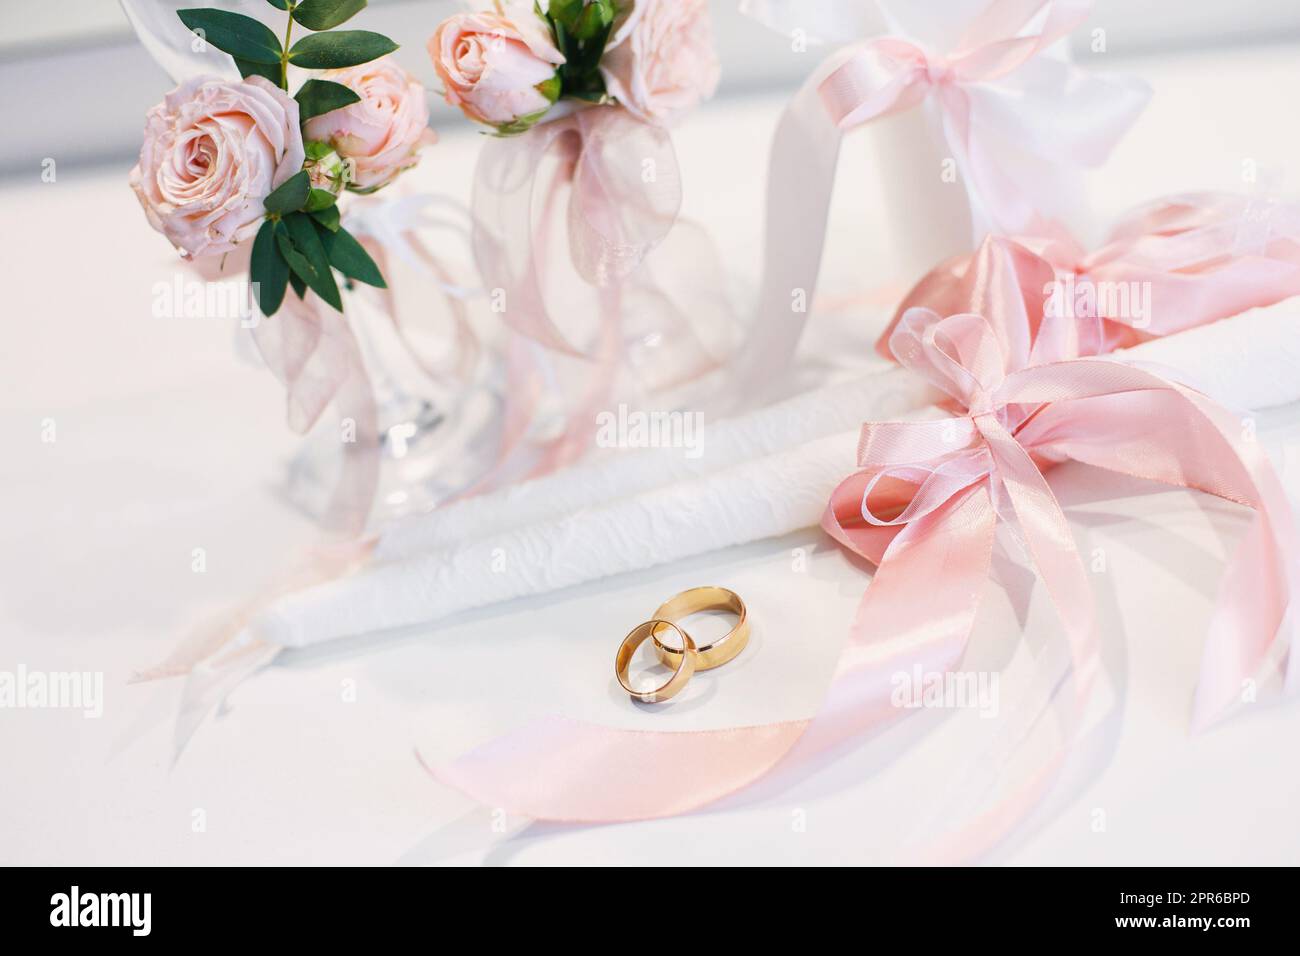 Gold wedding rings lie on the table near the wedding candles. Stock Photo